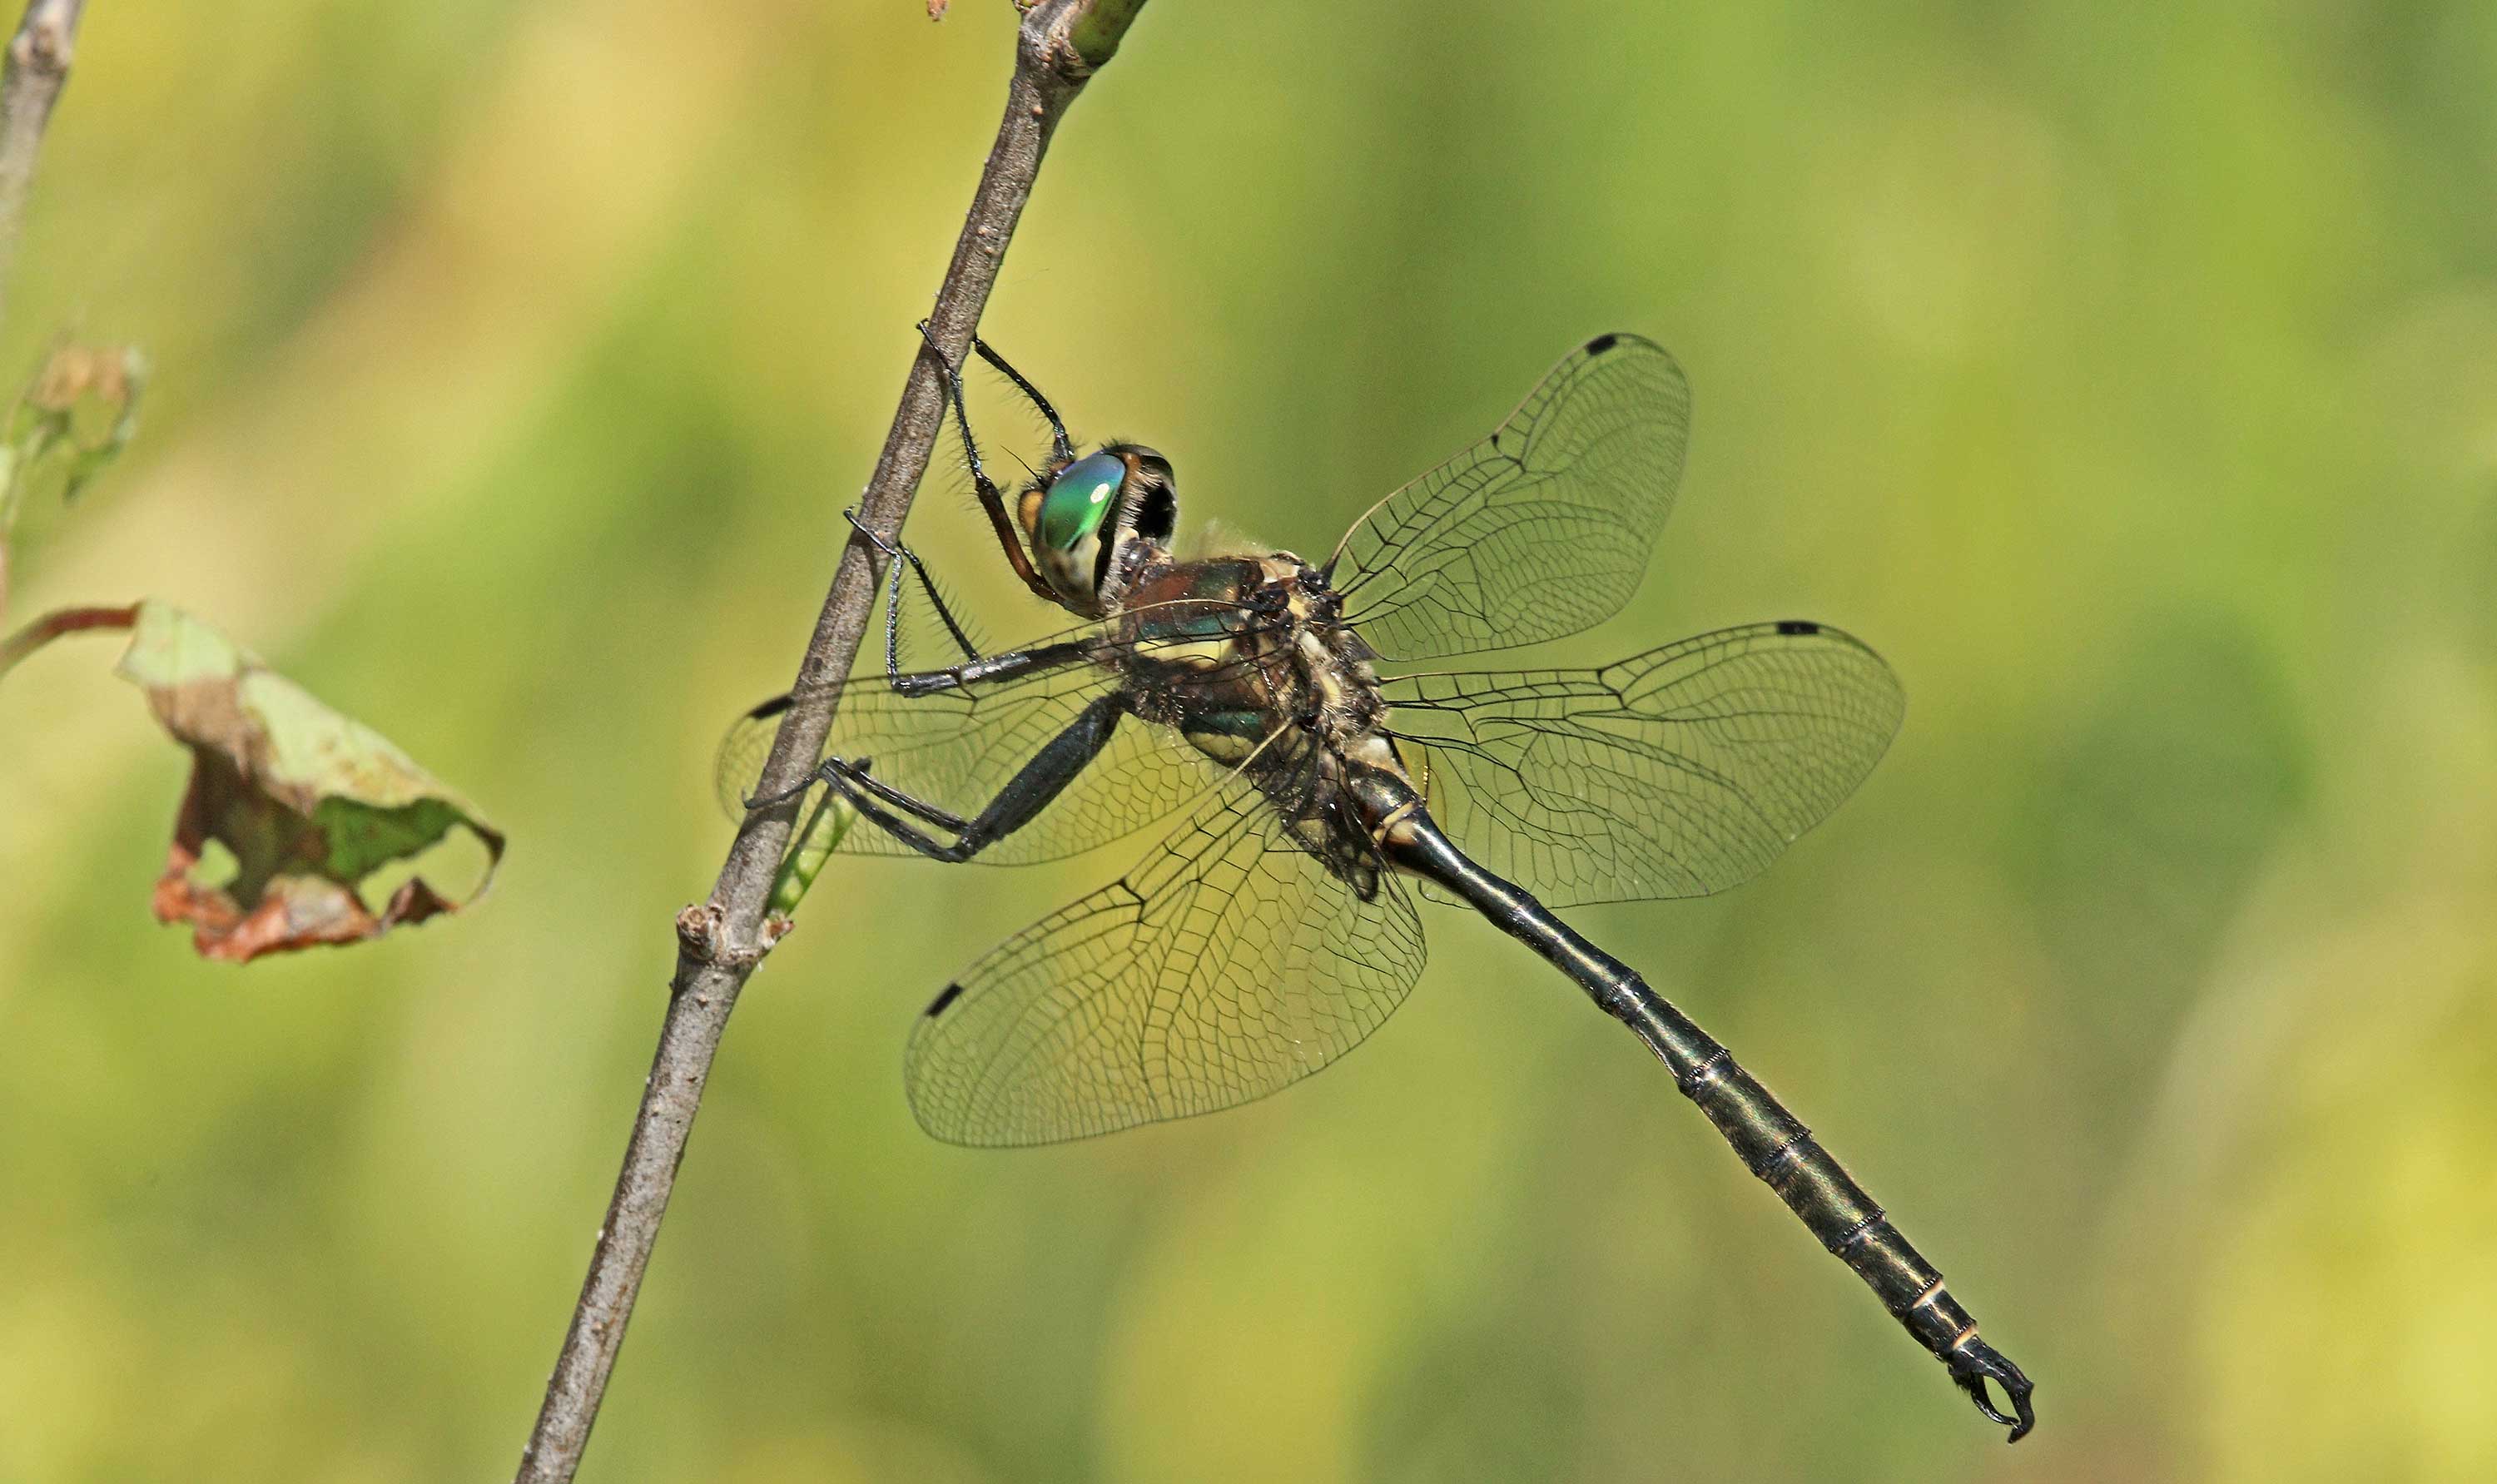 Hine's emerald dragonfly.